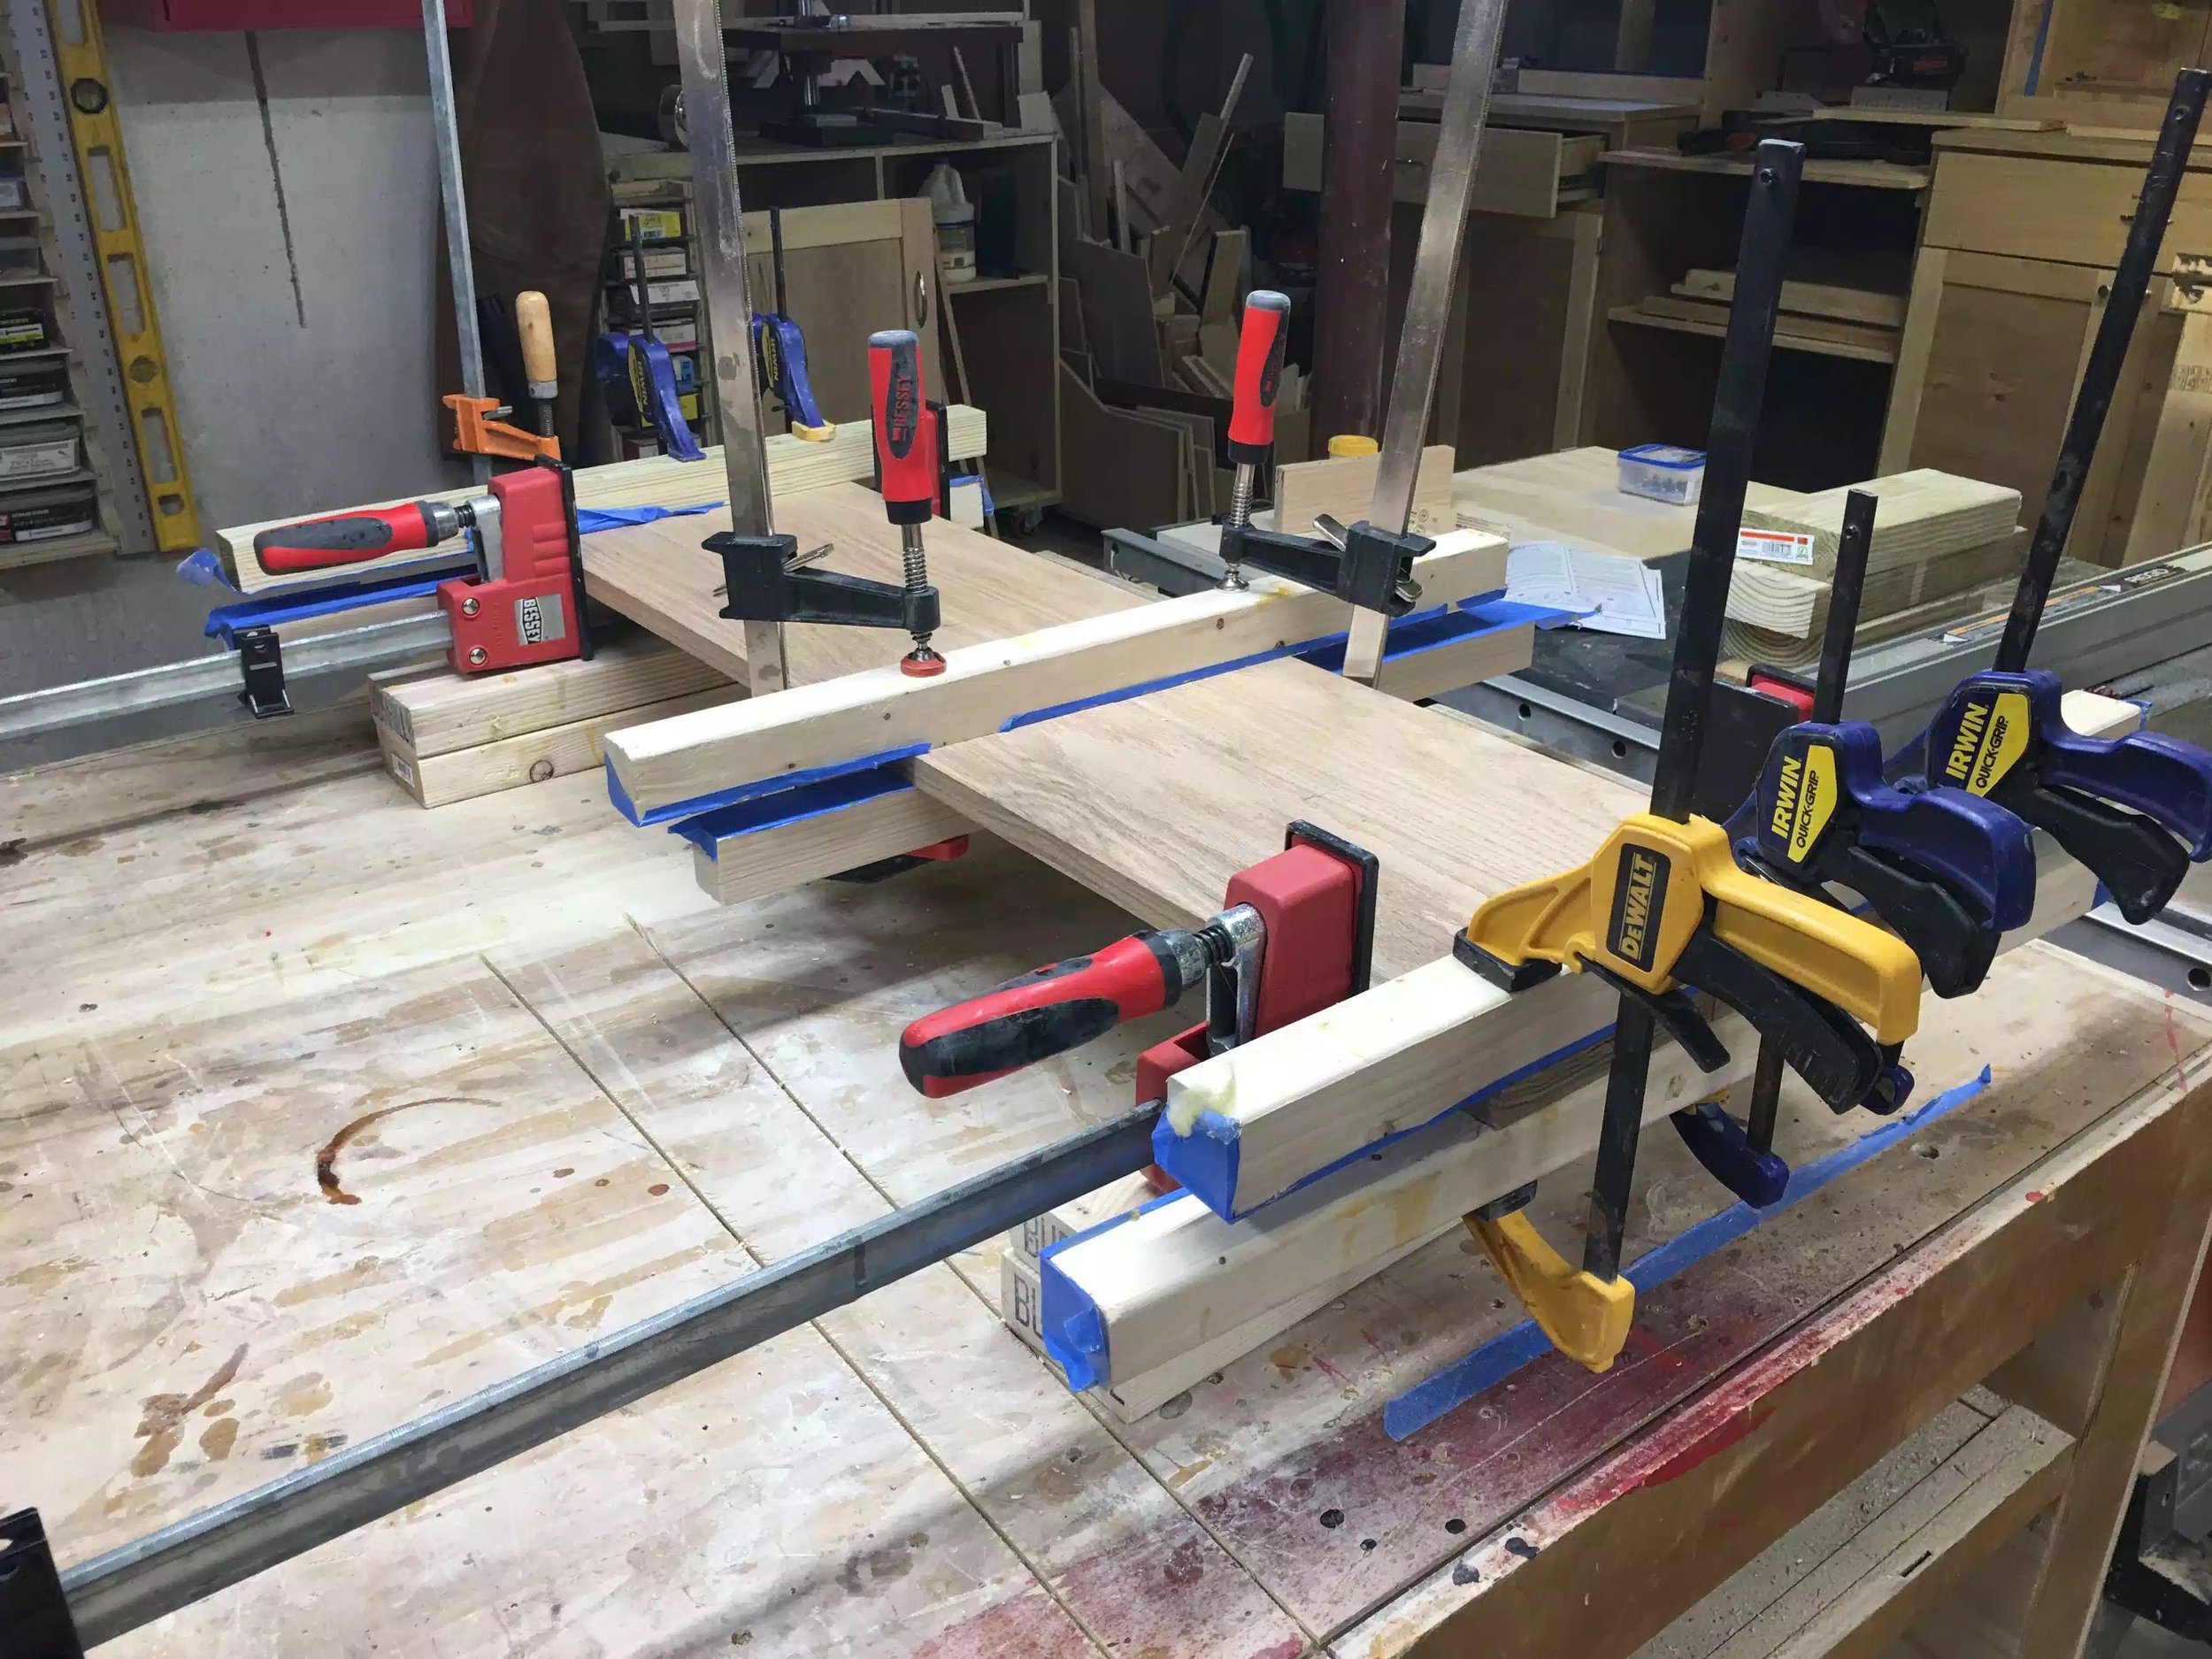 Another glue-up image